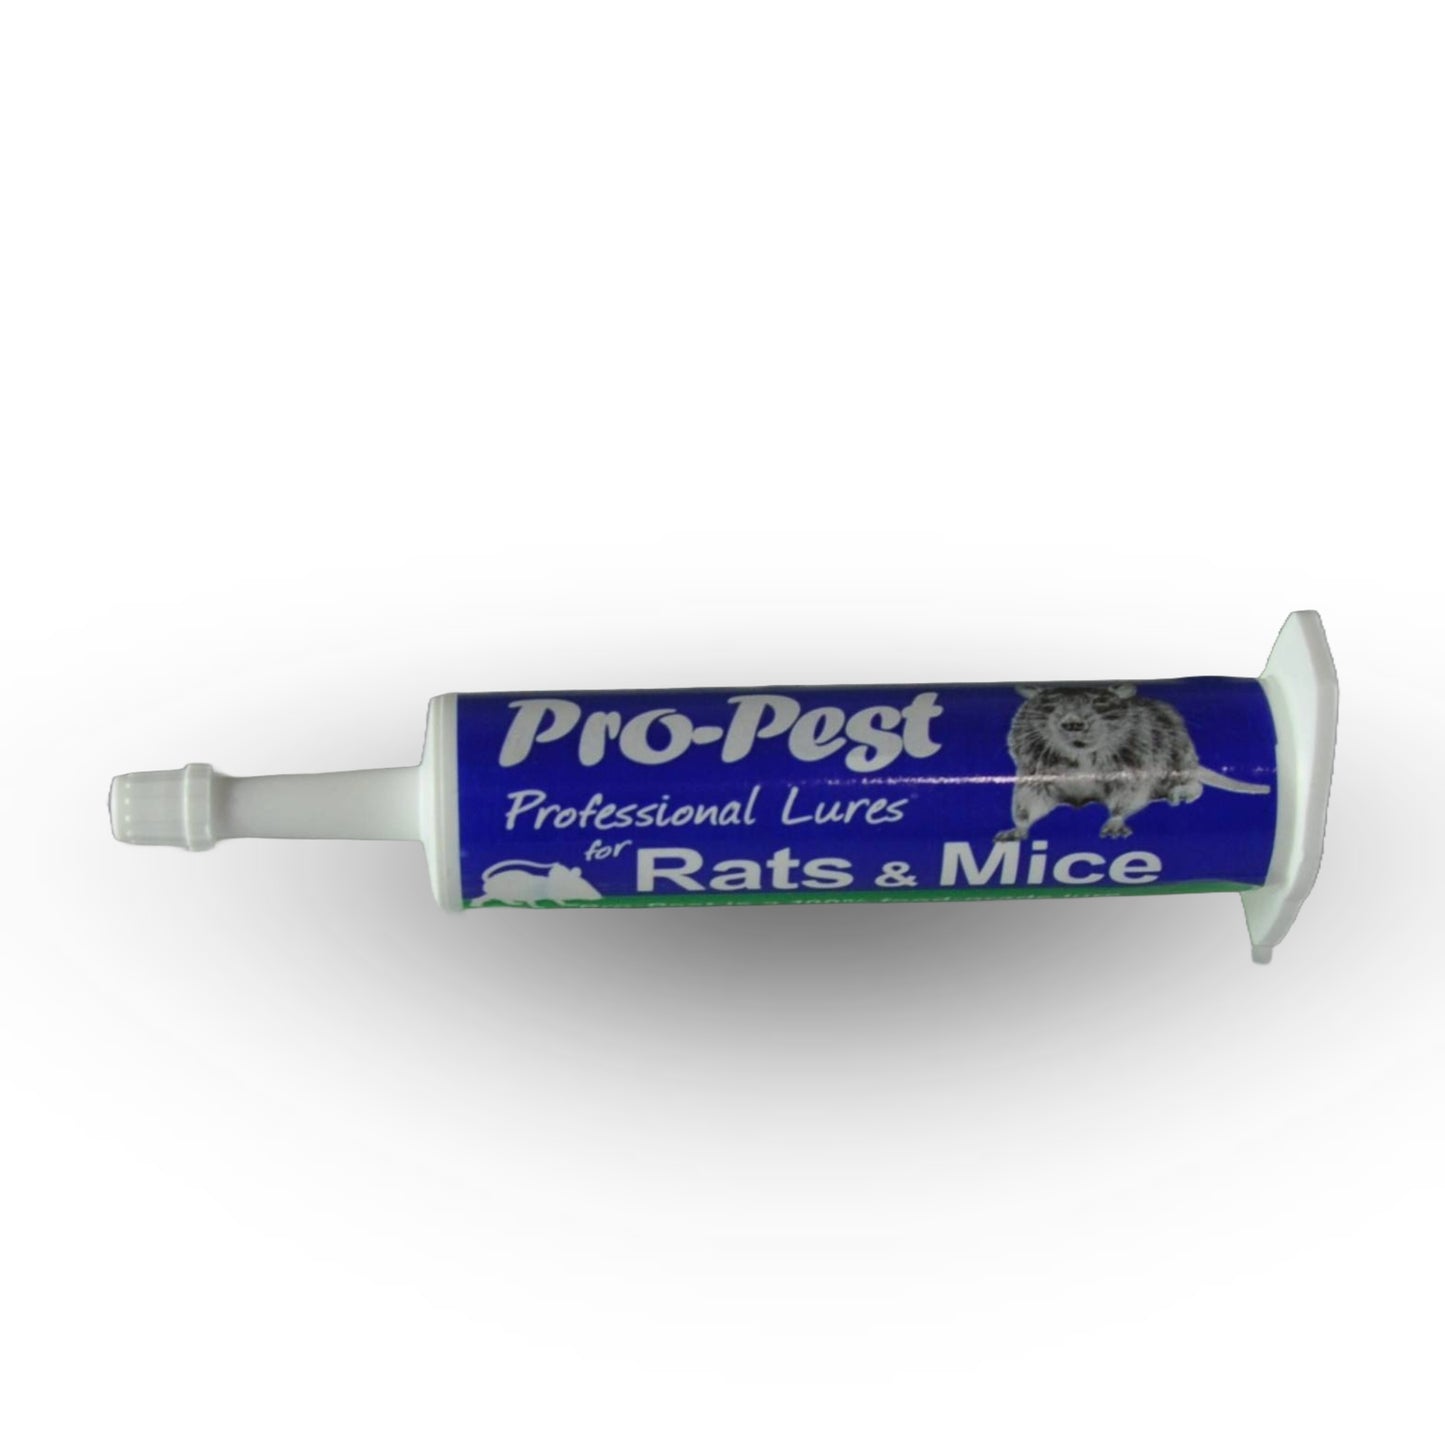 All-in-one rat kit